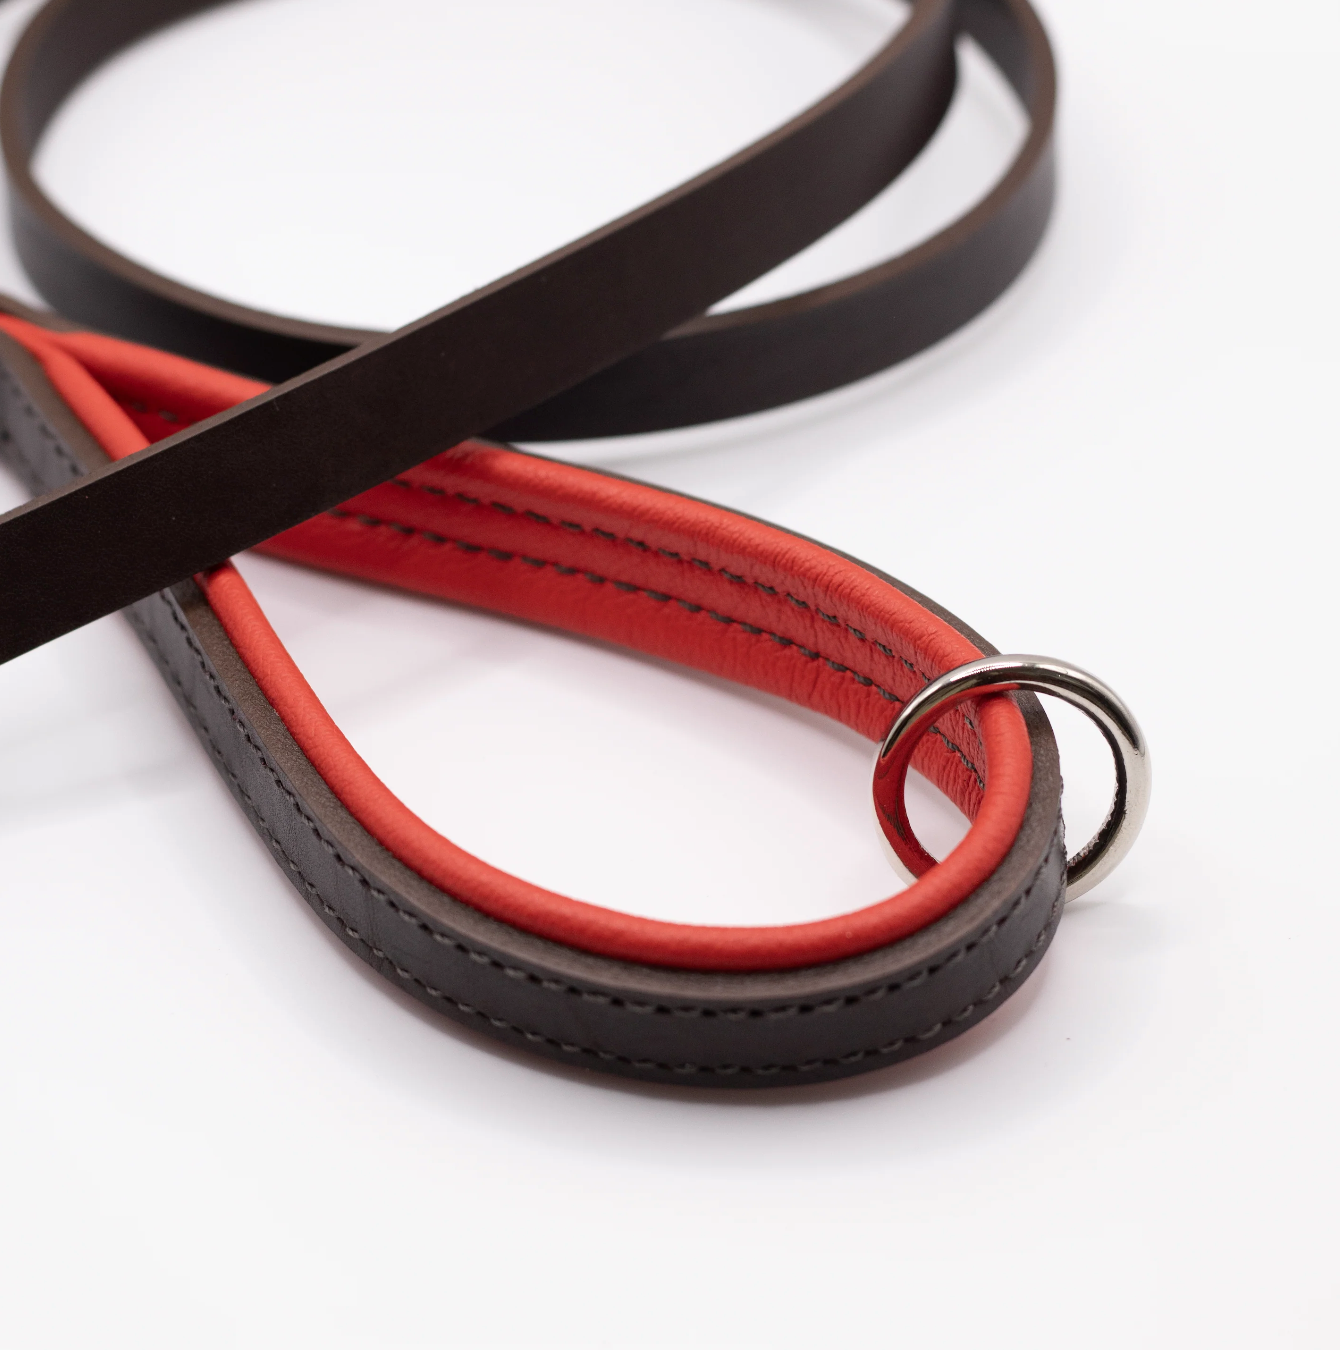 Handmade in Britain padded leather dog lead